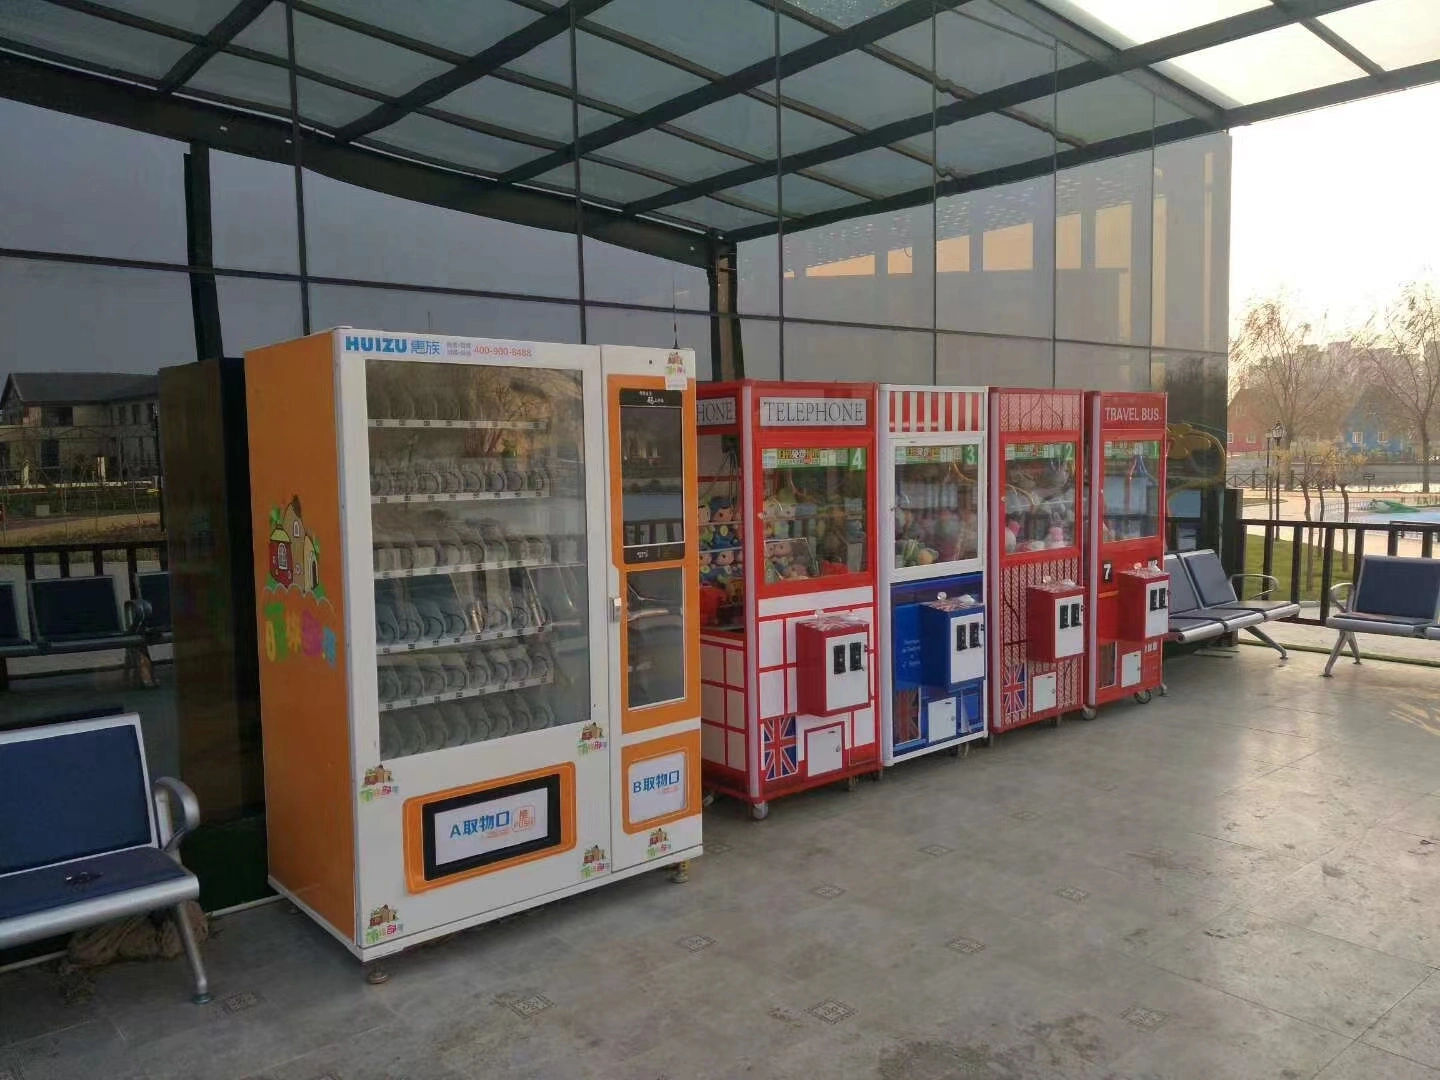 Putting a vending machine in front of the supermarket to make money